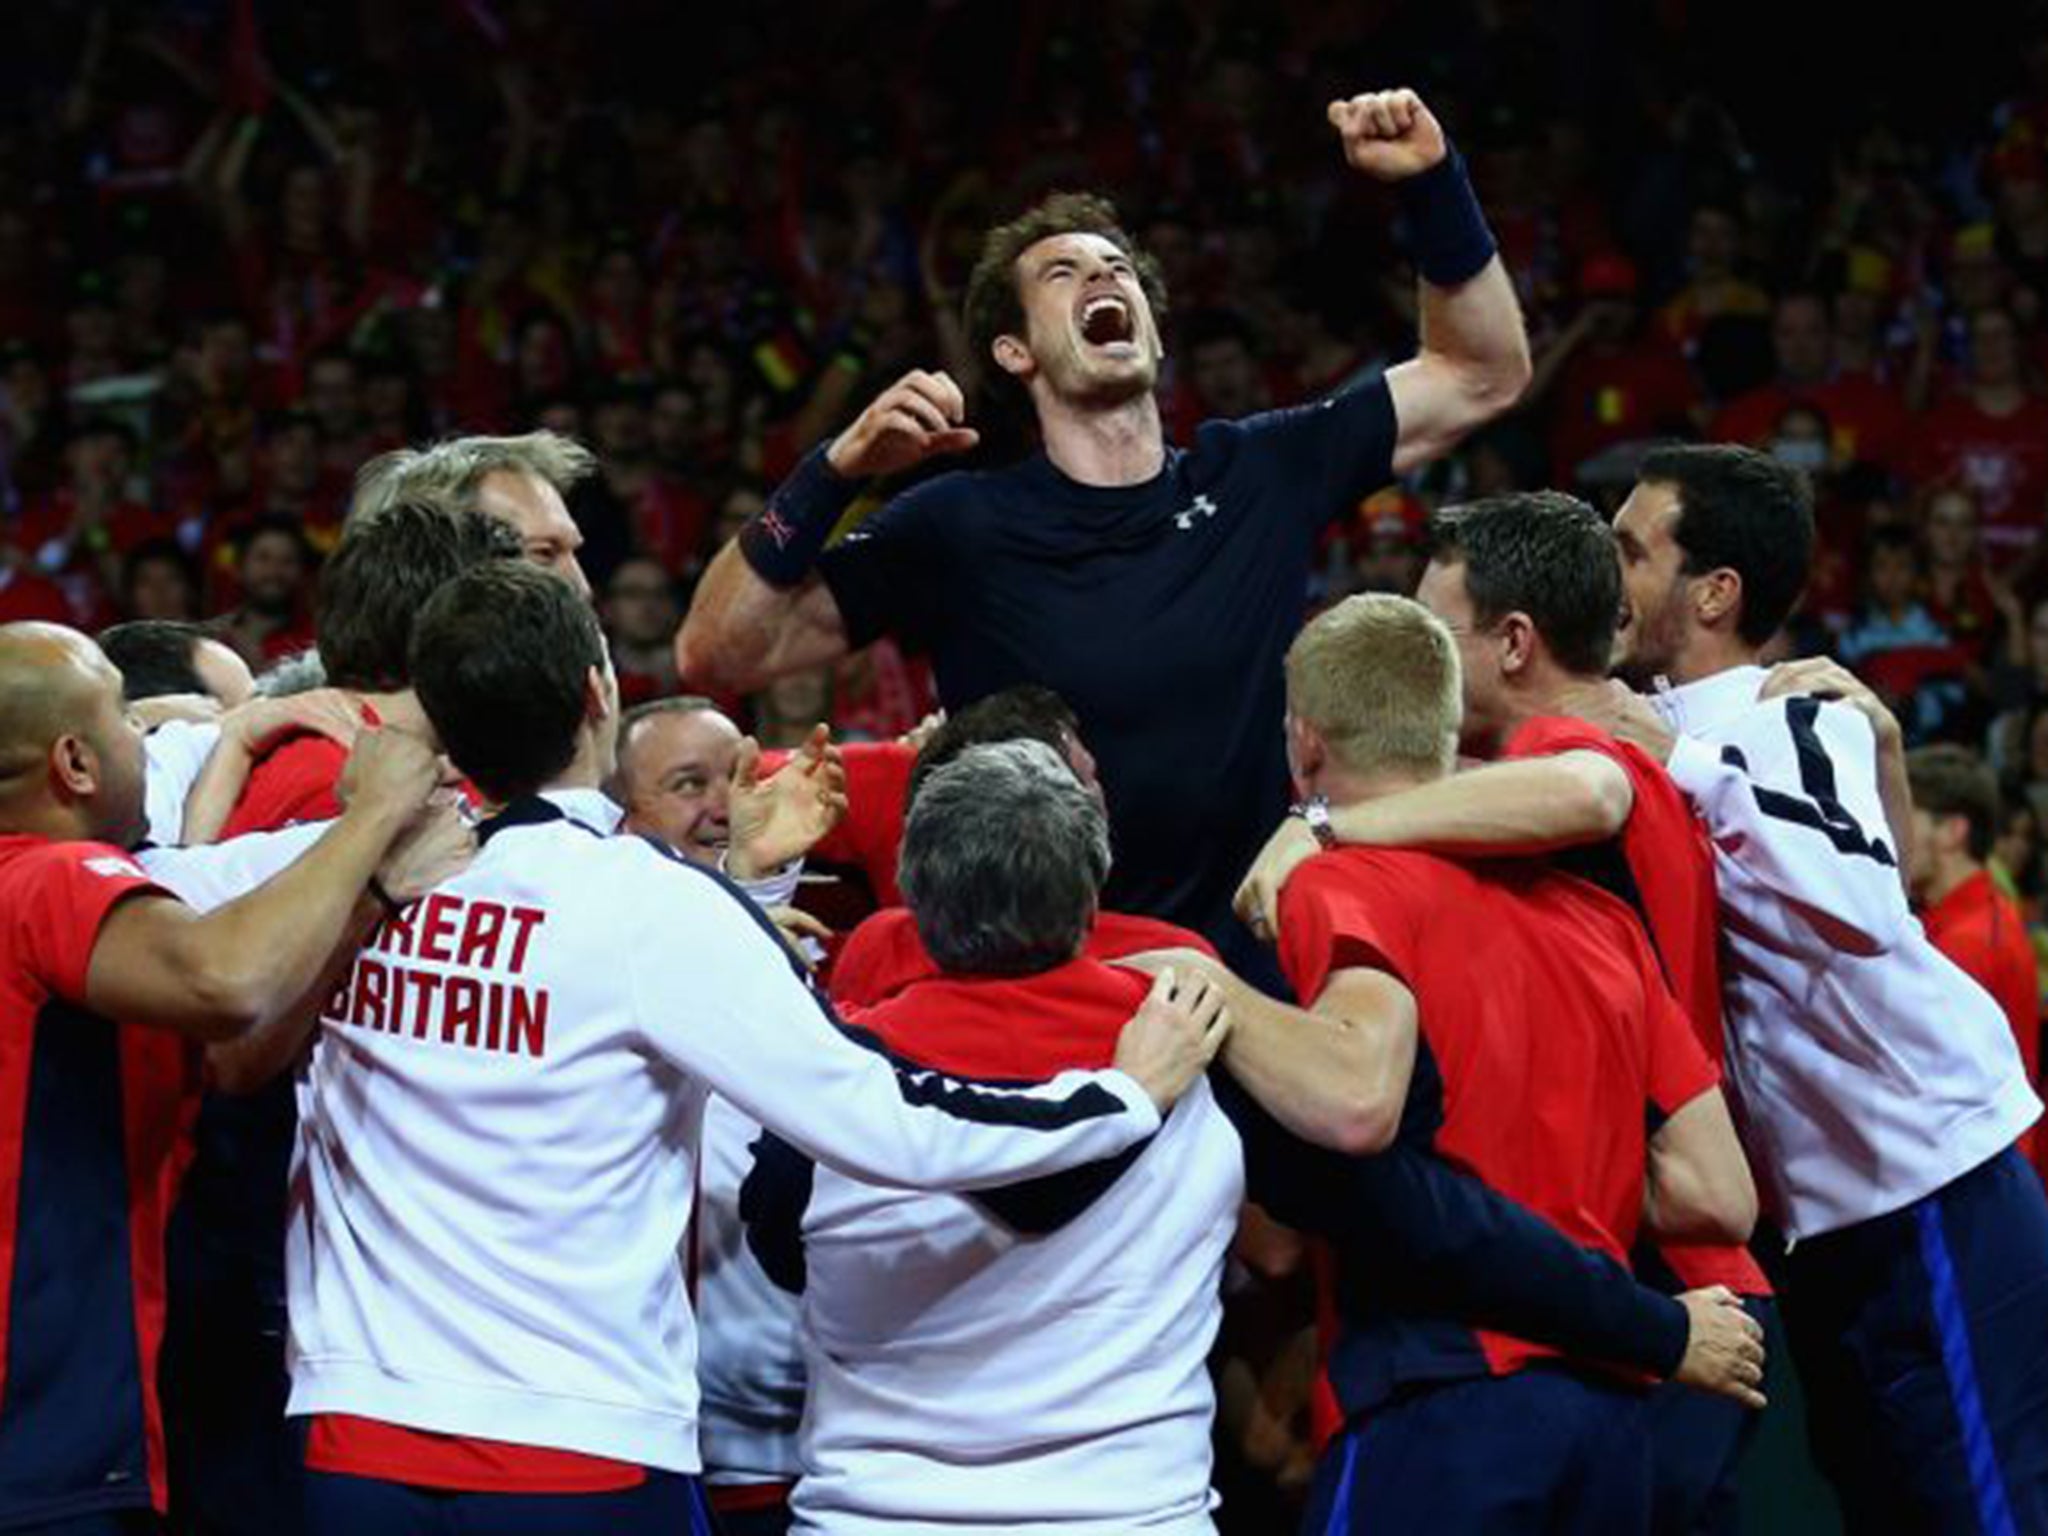 Andy Murray celebrates with his team after winning his match against David Goffin of Belgium to clinch the Davis Cup